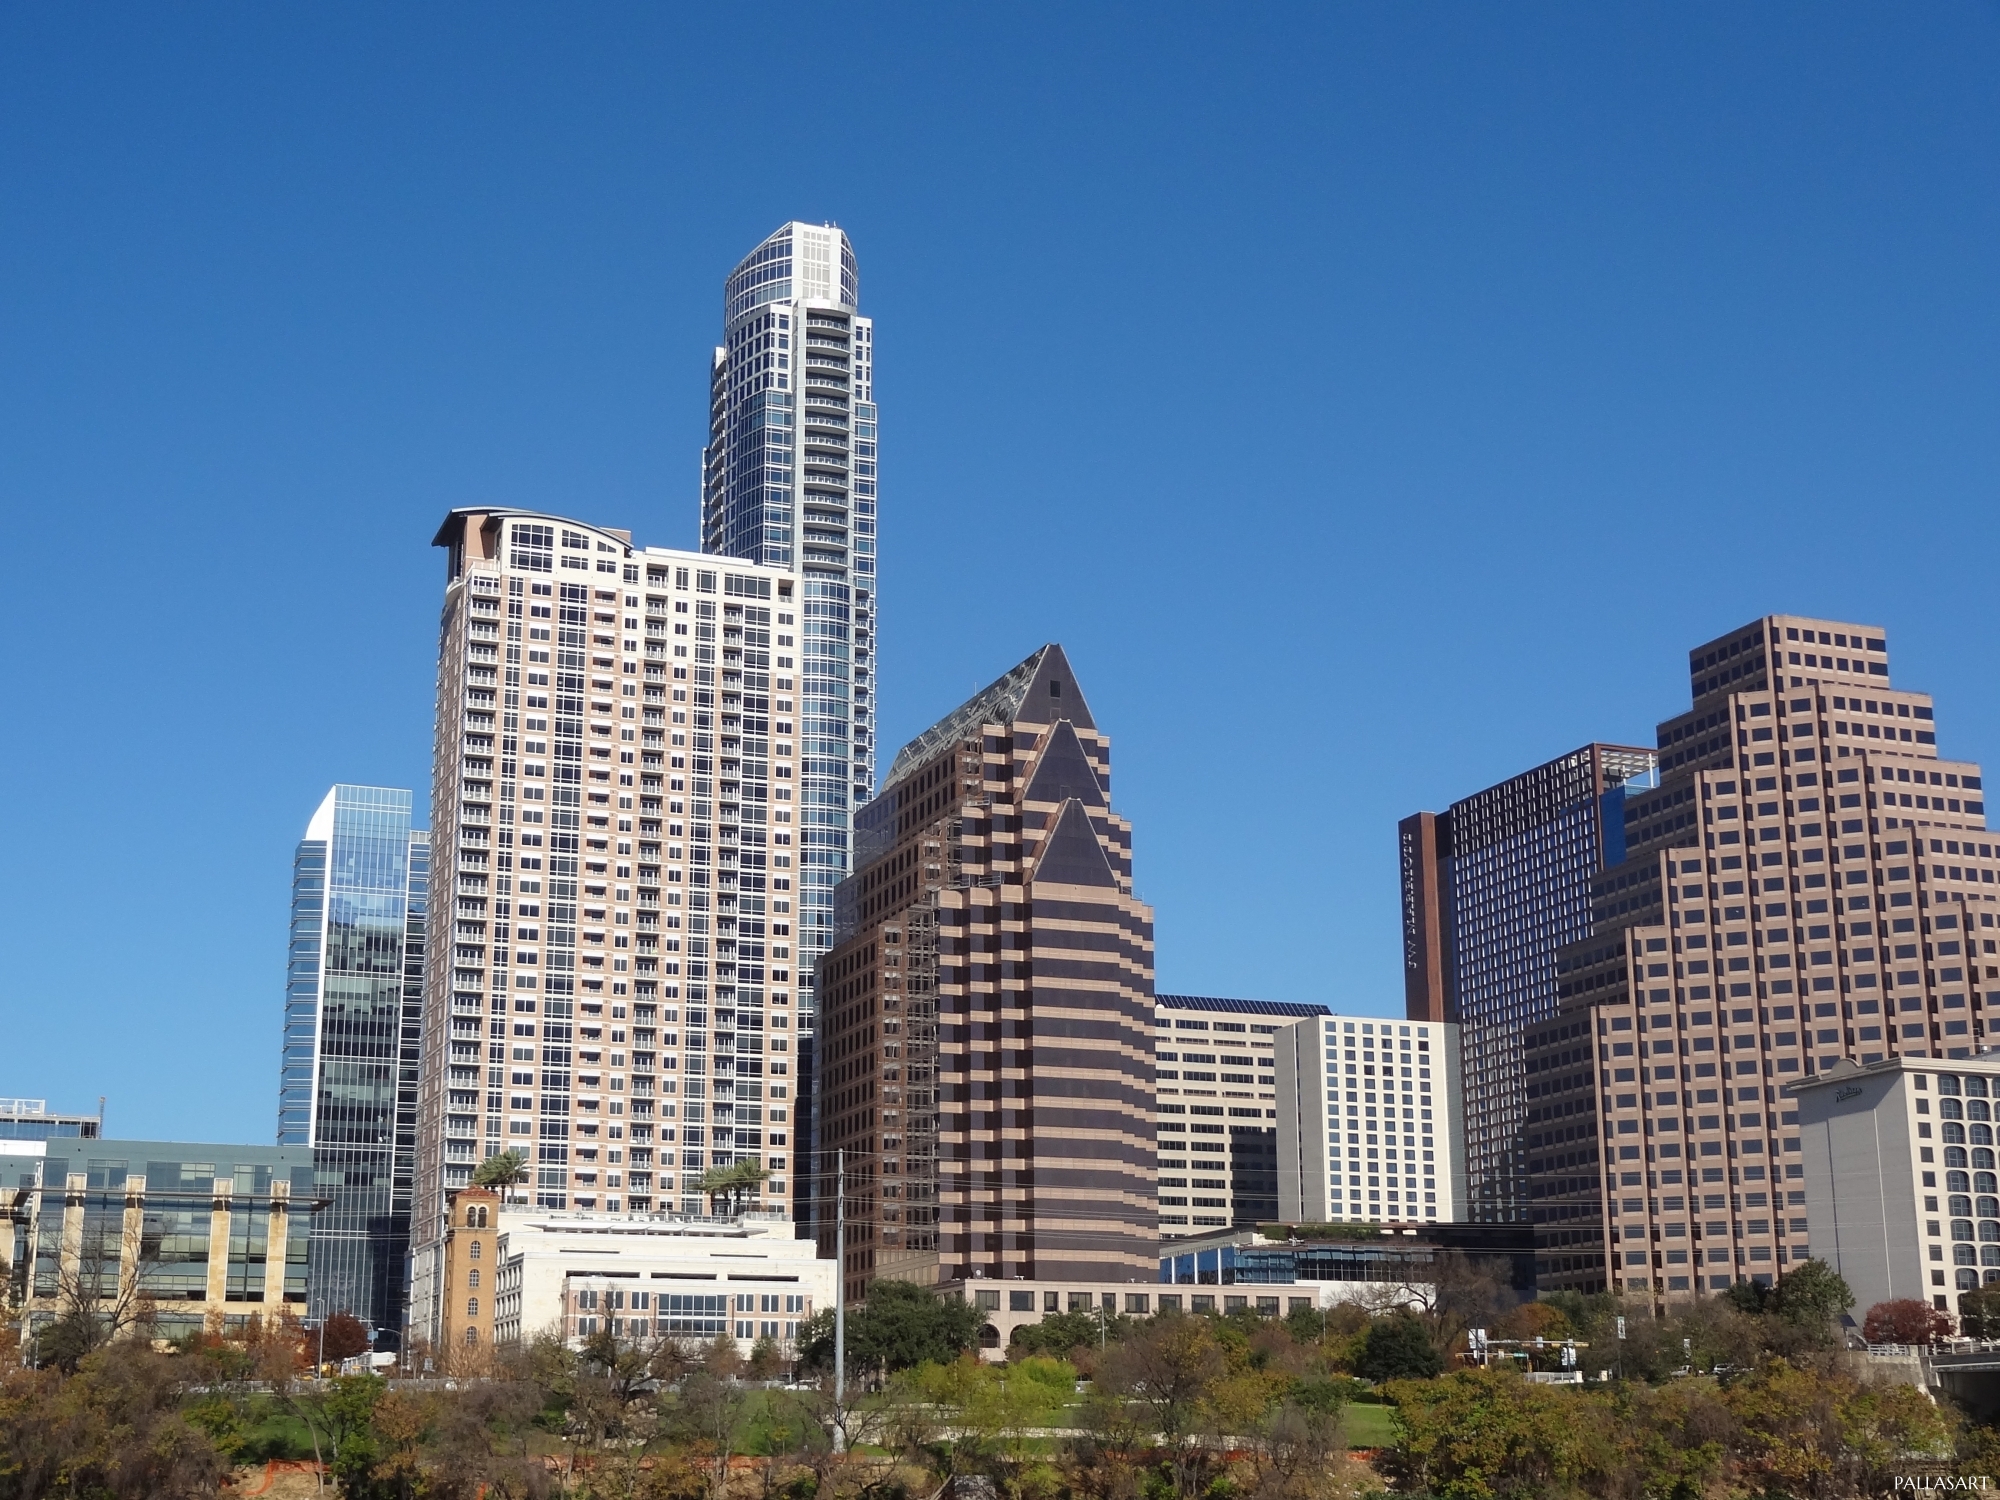 Austin skyscrapers downtown